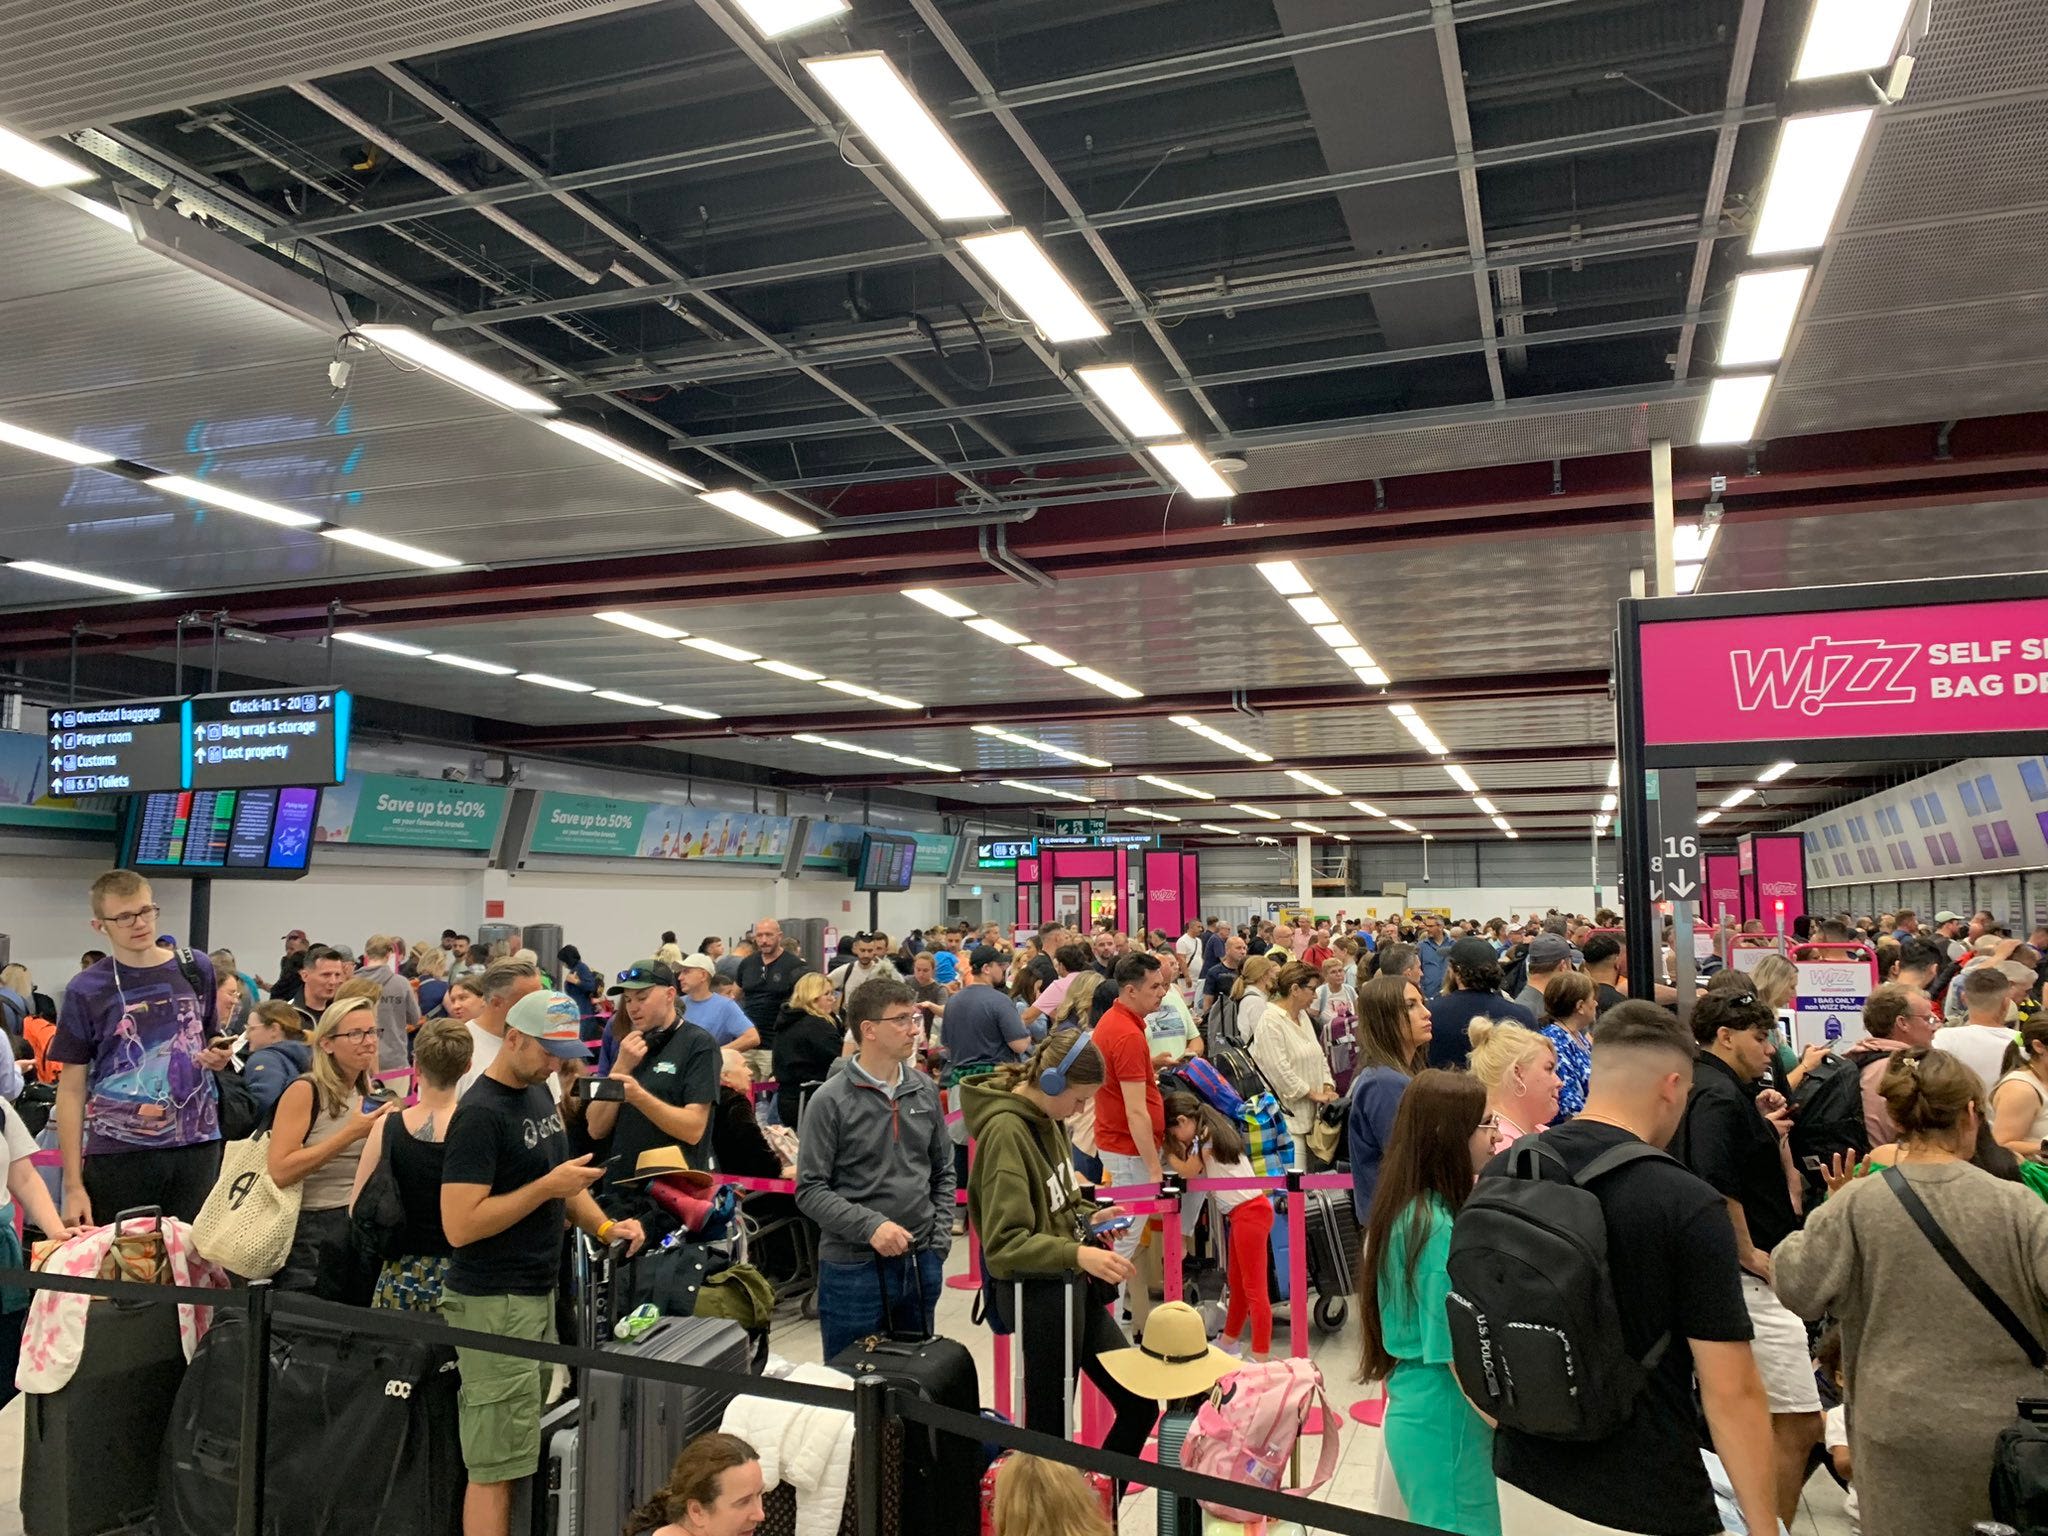 Photos show the chaos behind the global IT outage that's impacting retailers, flights, and hospitals